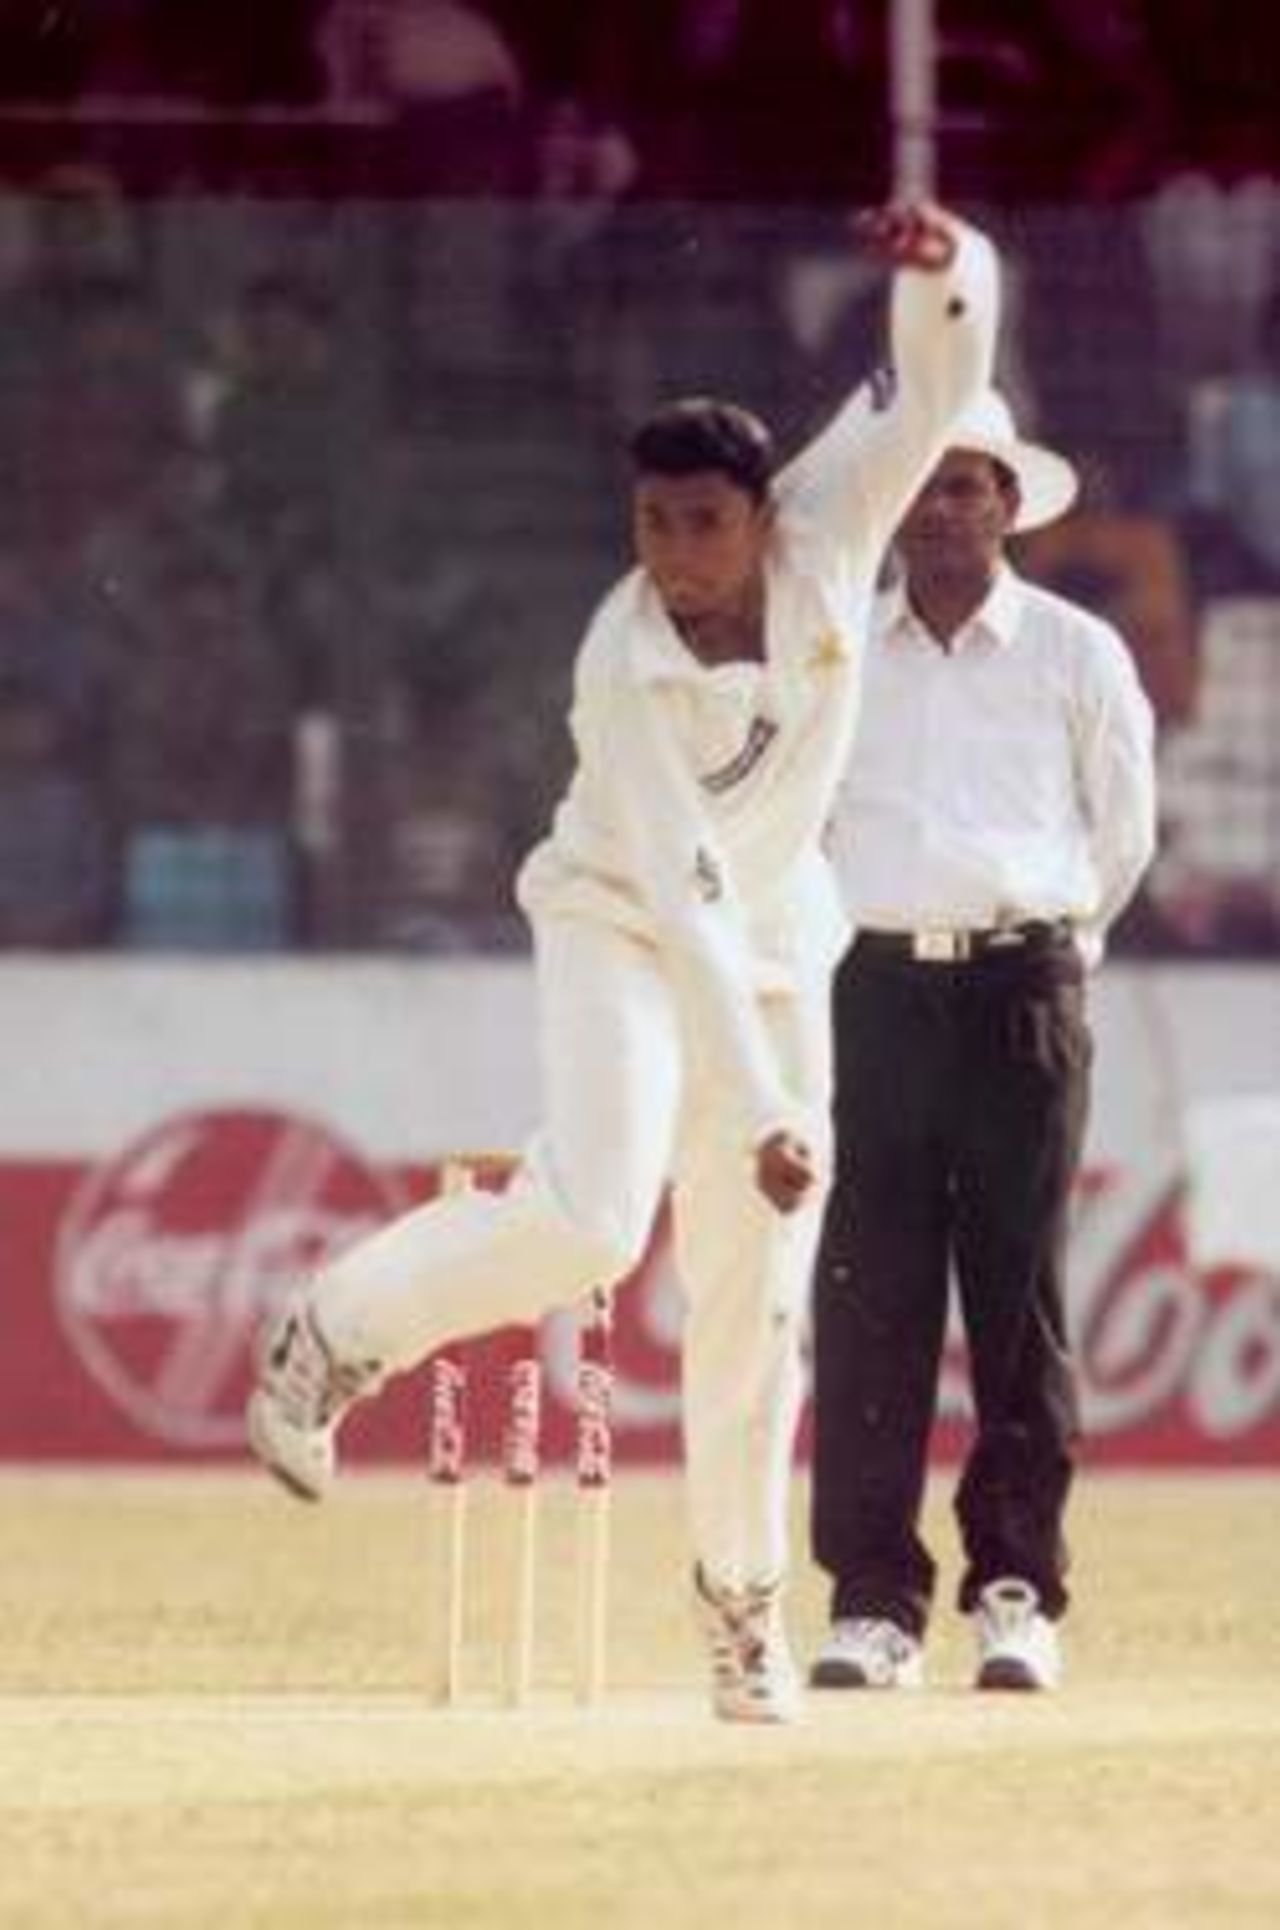 Kaneria is bowling in his 7 wicket haul spell in 2nd innings of Dhaka Test